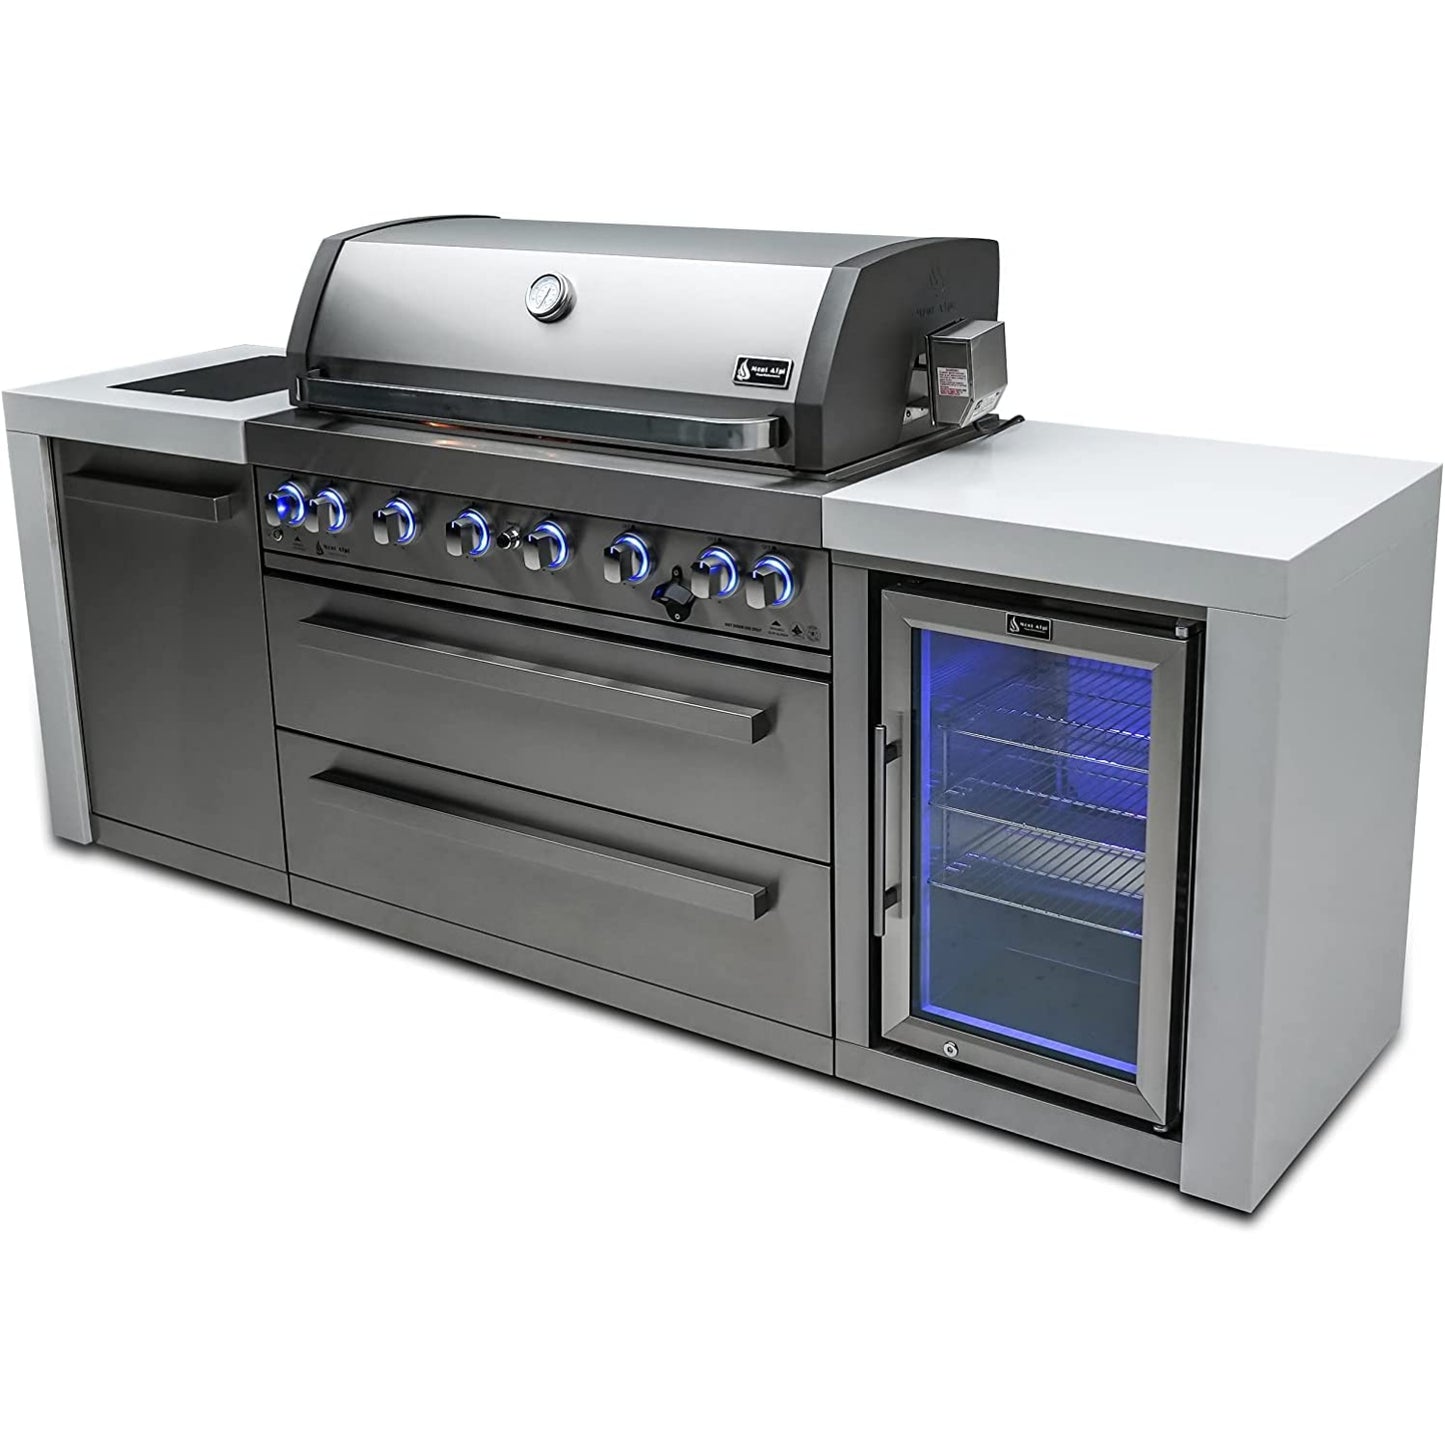 Mont Alpi 805 Grill Deluxe Island with Fridge Cabinet - Upper Livin